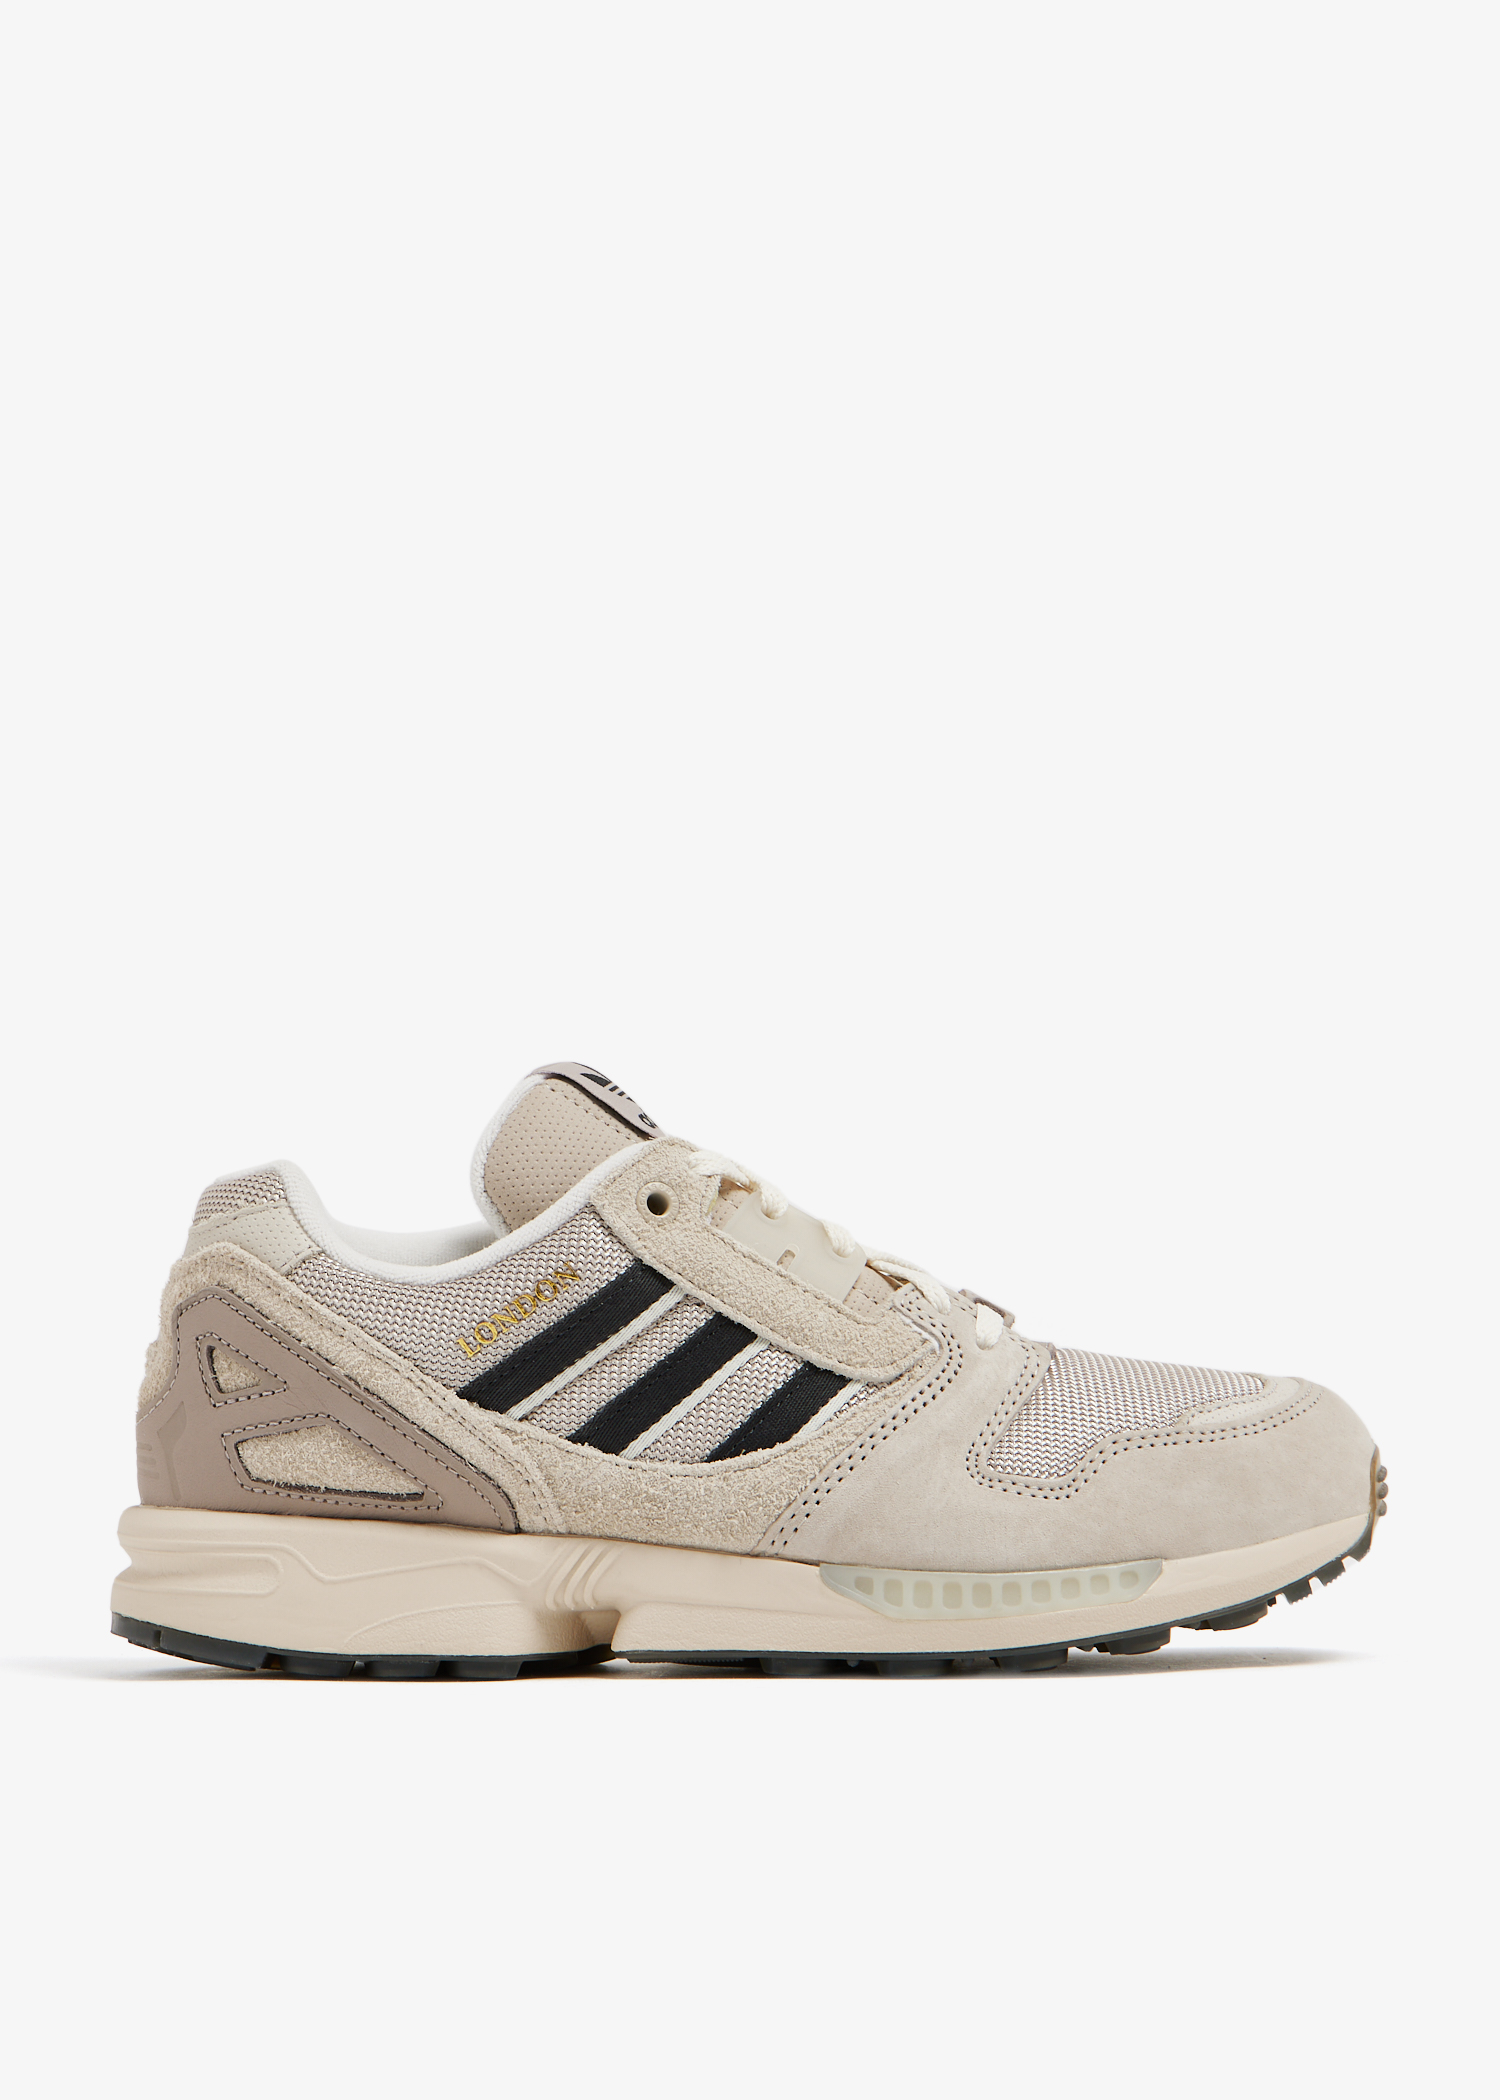 Adidas x OFFSPRING ZX 8000 'Consortium Cup' sneakers for Men 